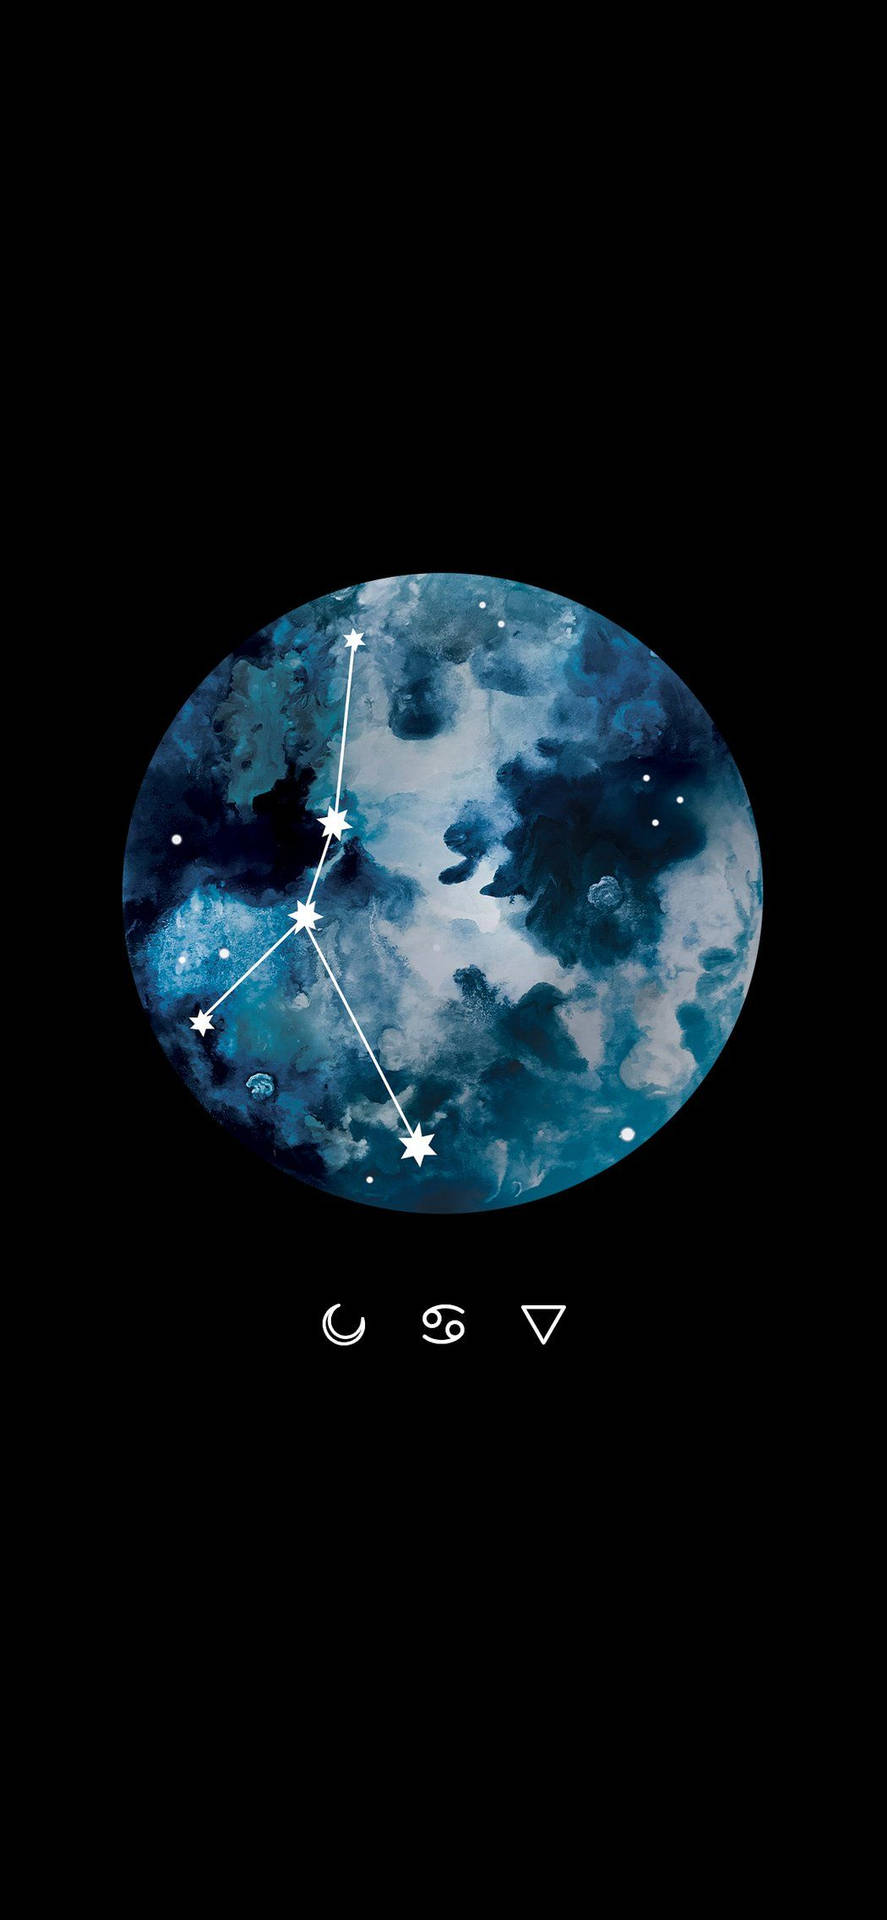 Full Moon And Cancer Constellation Wallpaper